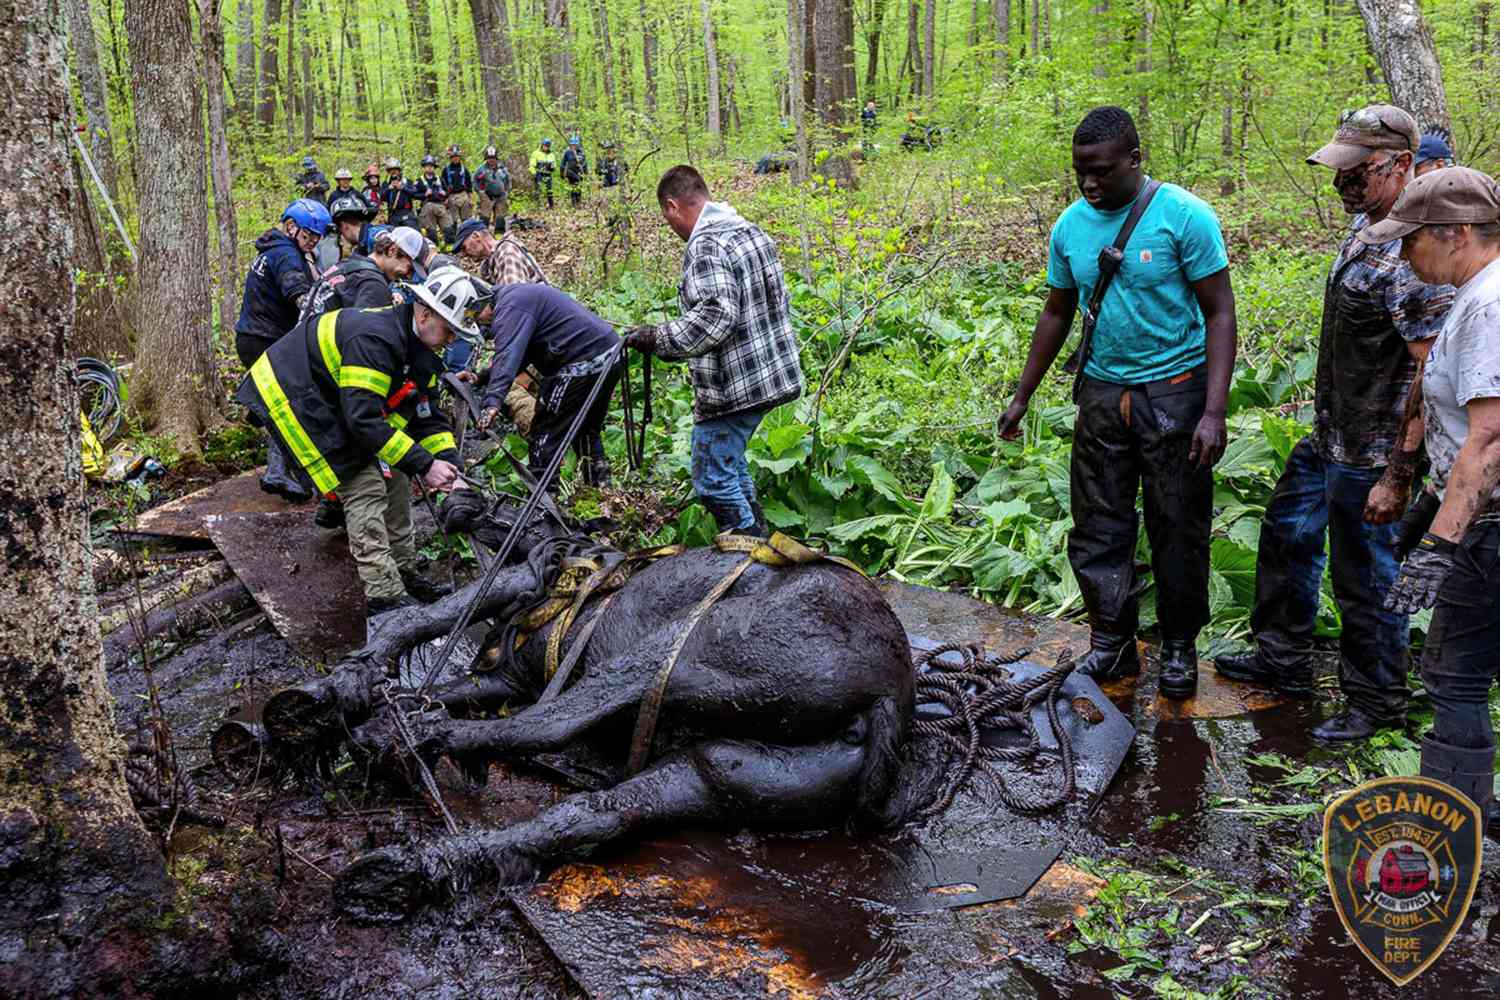 Horses Trapped in 'Waist-Deep' Connecticut Mud Saved by Nearly 40 First Responders After 5-Hour Rescue Mission